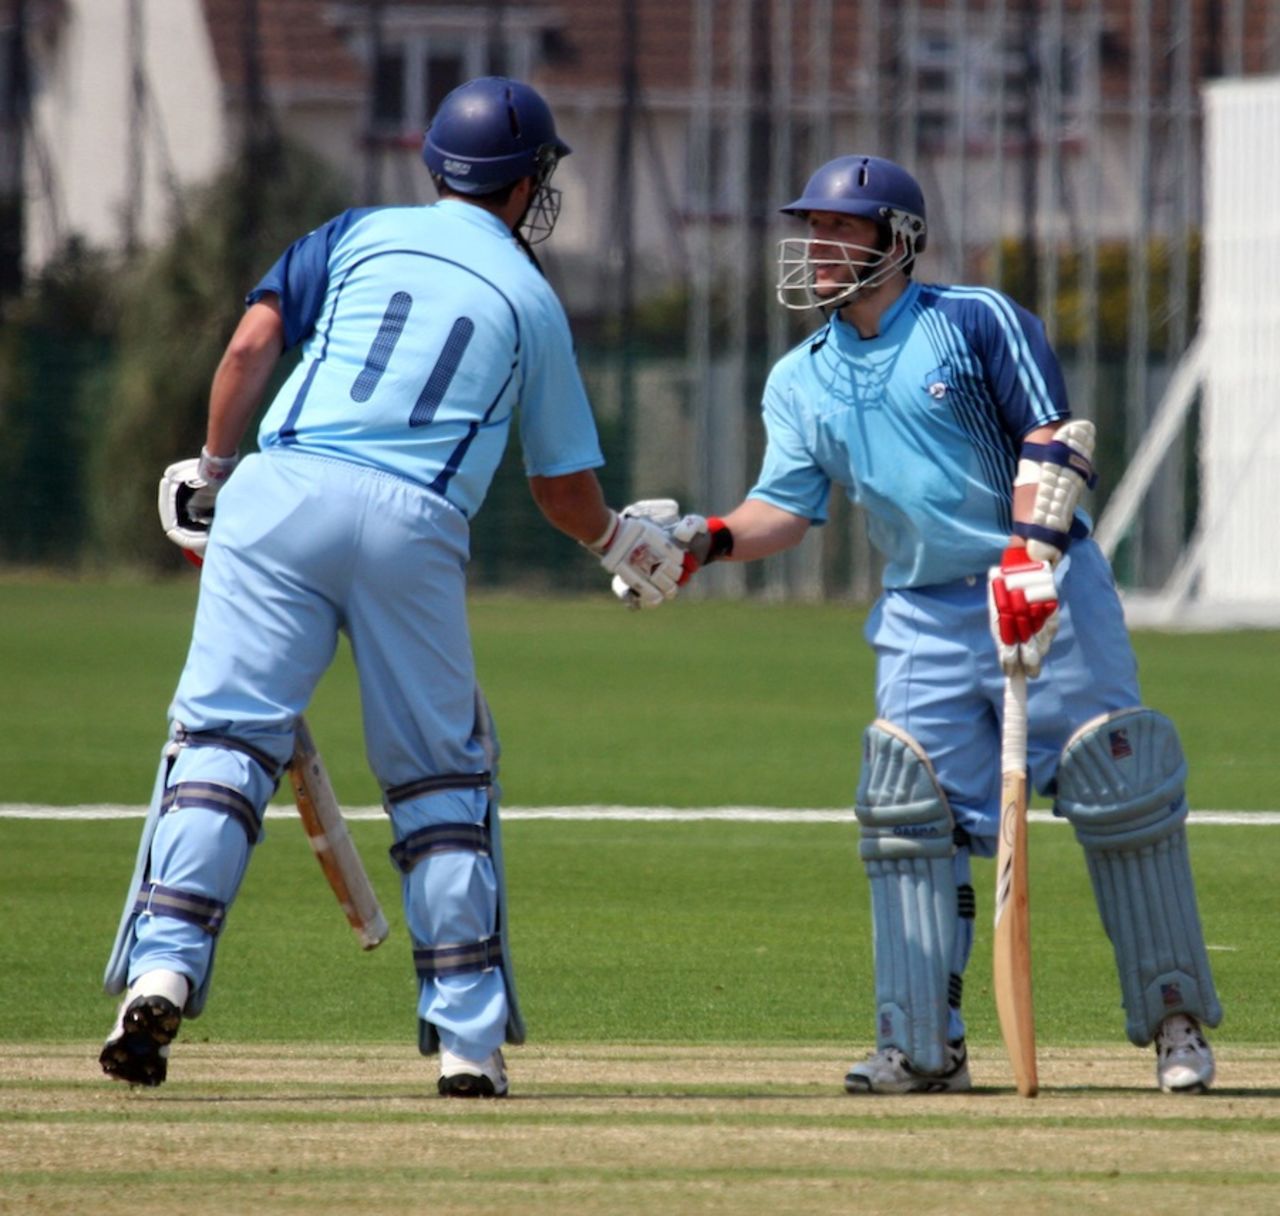 Pablo Ferguson is congratulated after reaching his fifty, Argentina v Vanuatu, ICC World Cricket League Division Six, St Clement, July 22, 2013